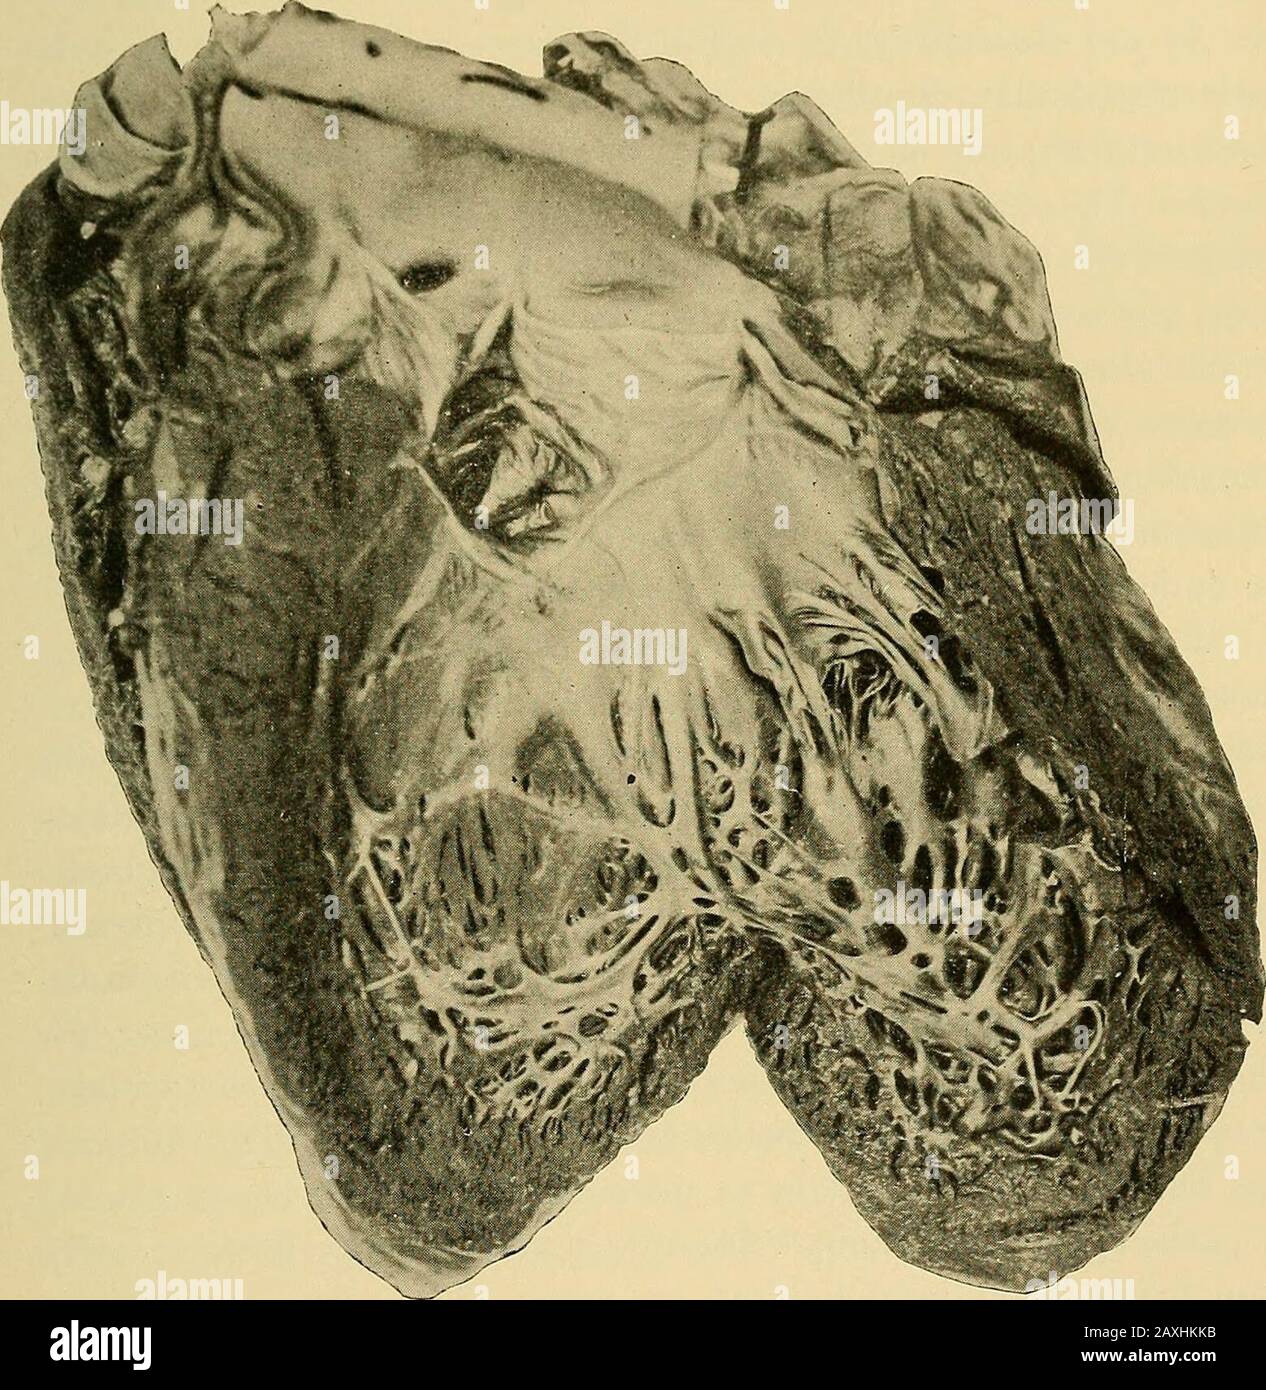 Diseases of the heart and arterial system : designed to be a practical presentation of the subject for the use of students and practitioners of medicine . s. Stenosis of the pulmonary or aortic orifices may result fromthe more or less complete fusion of all three cusps (Fig. 78), andthis may even proceed to complete atresia. The fusion may bethe result of foetal endocarditis or developmental error. In theformer case the valve presents much the same appearance as after686 COXliKNITAIi IMSKASKS OF TIIK HEART 687 postnatal endocarditis. Vegetations may cover the cusps, projectinto the ventricle, Stock Photo